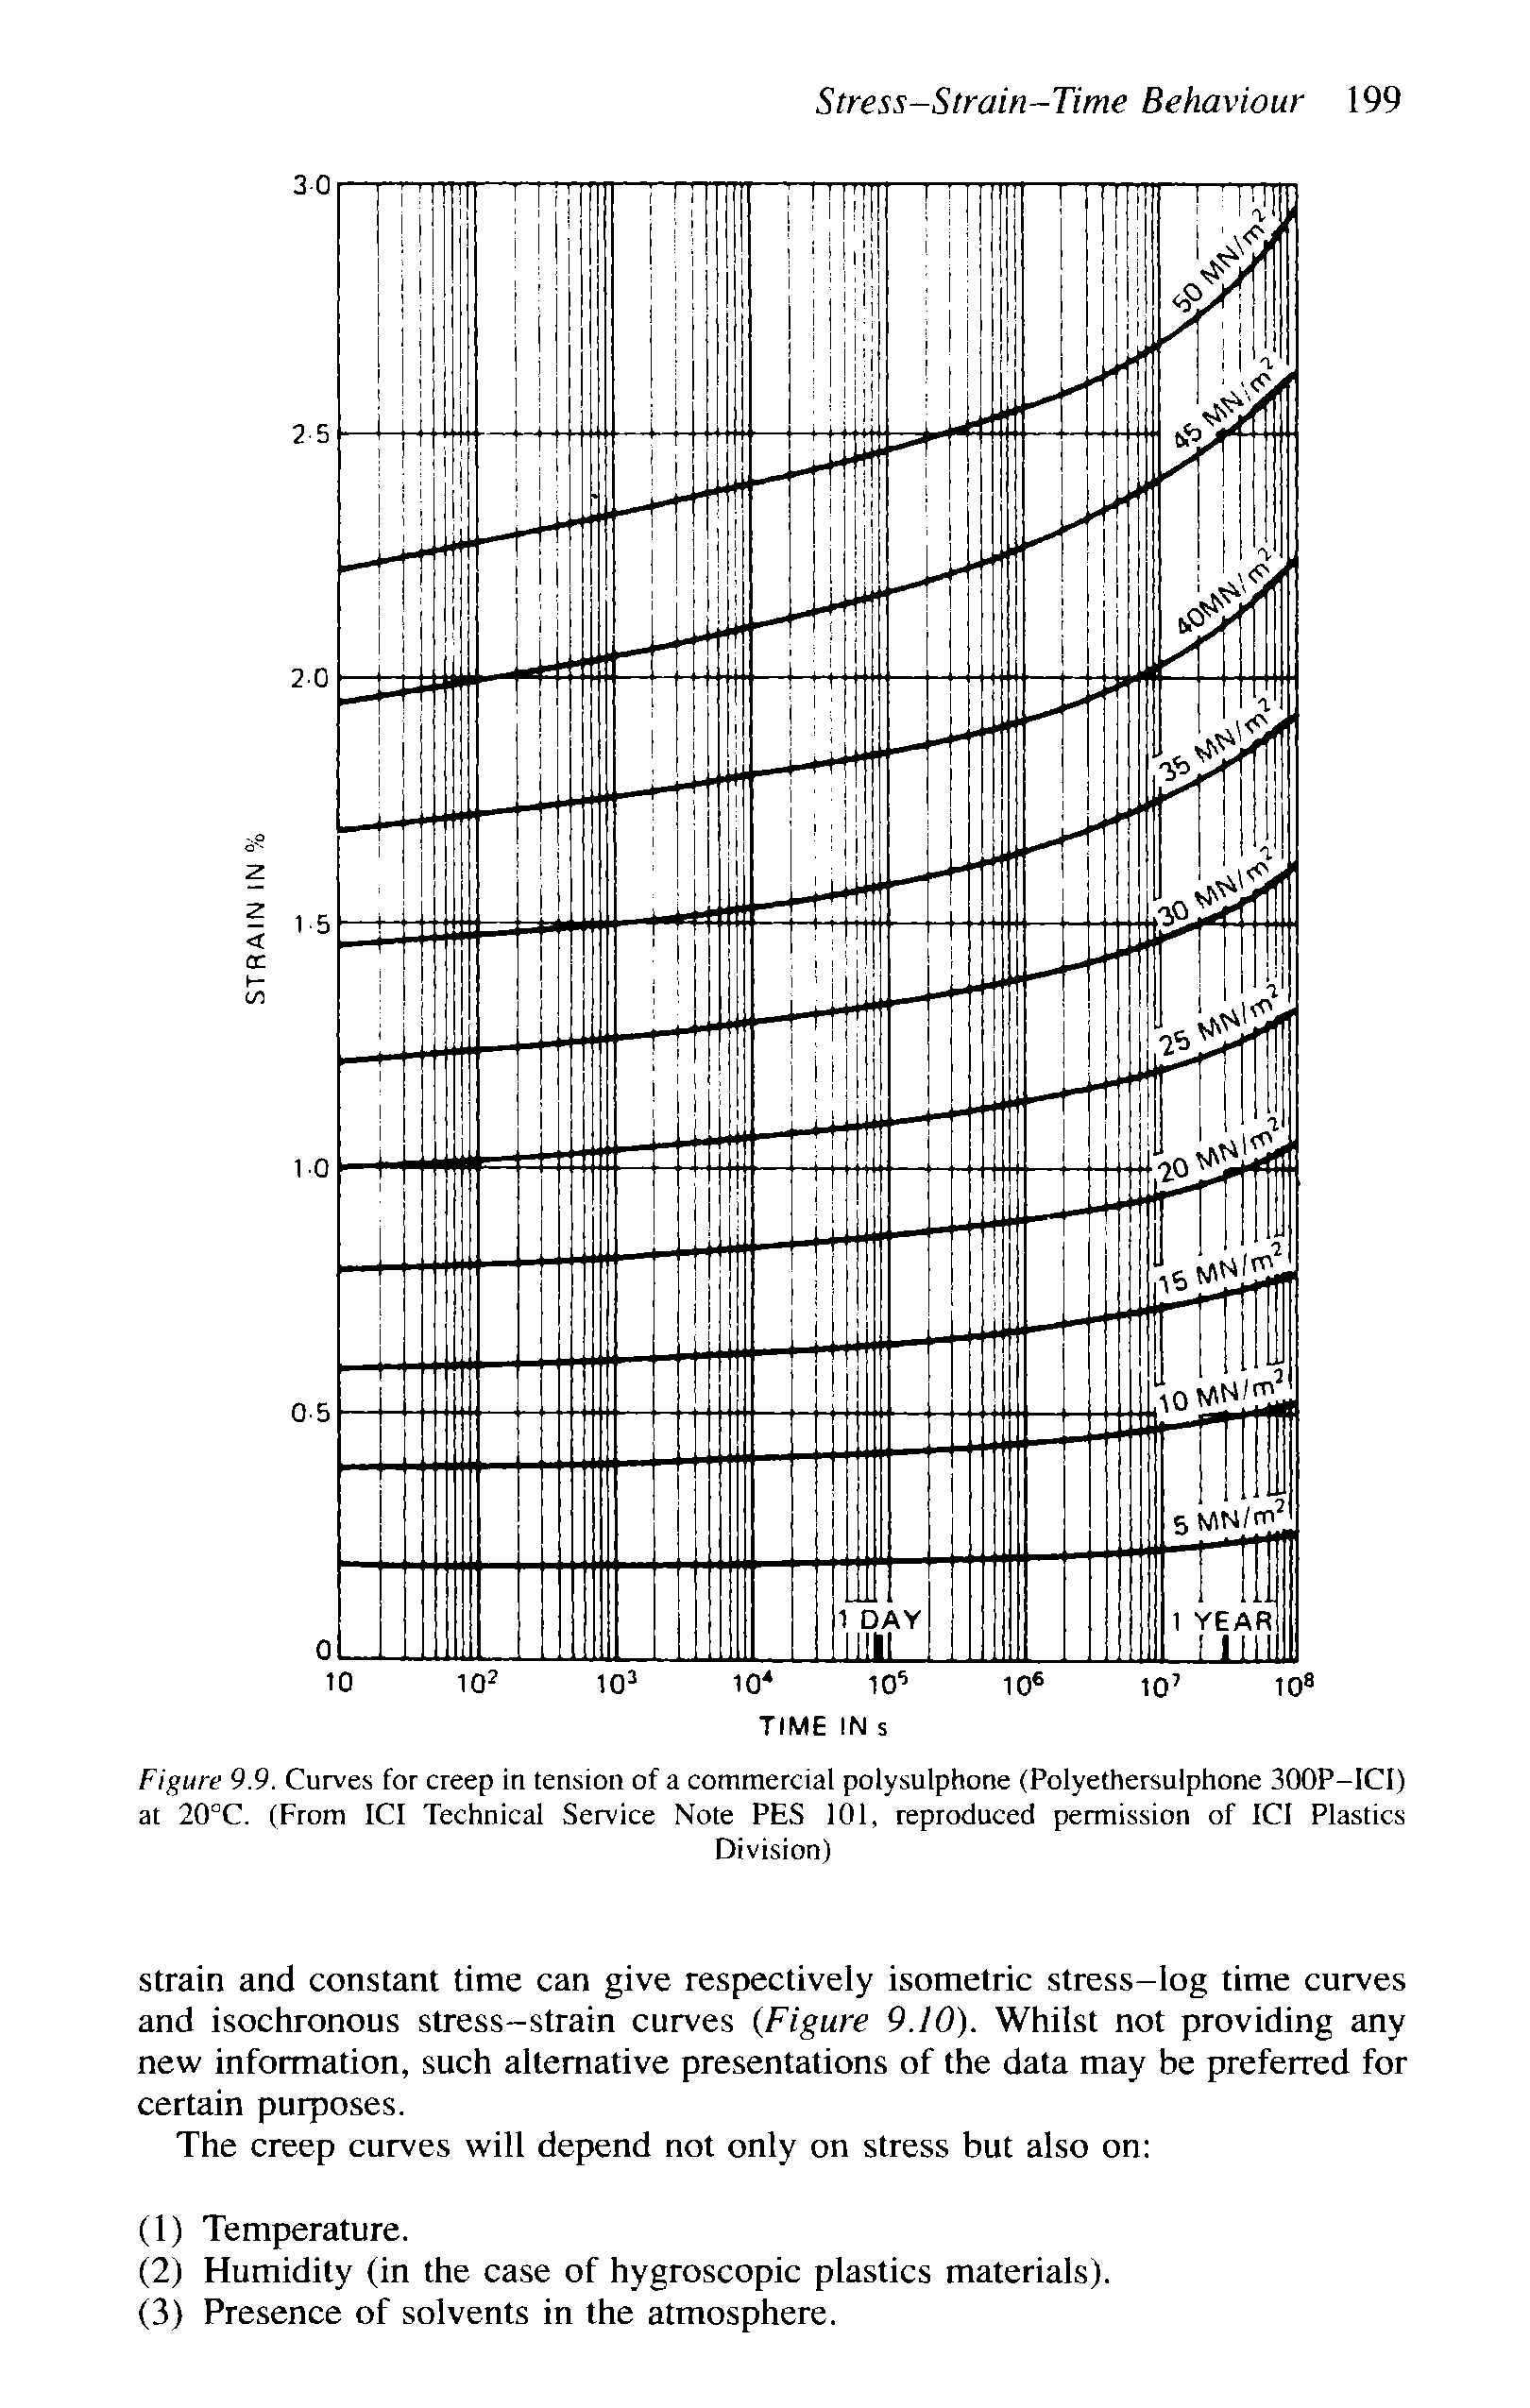 Figure 9.9. Curves for creep in tension of a commercial polysulphone (Polyethersulphone 300P-ICI) at 20°C. (From ICI Technical Service Note PES 101, reproduced permission of ICI Plastics...